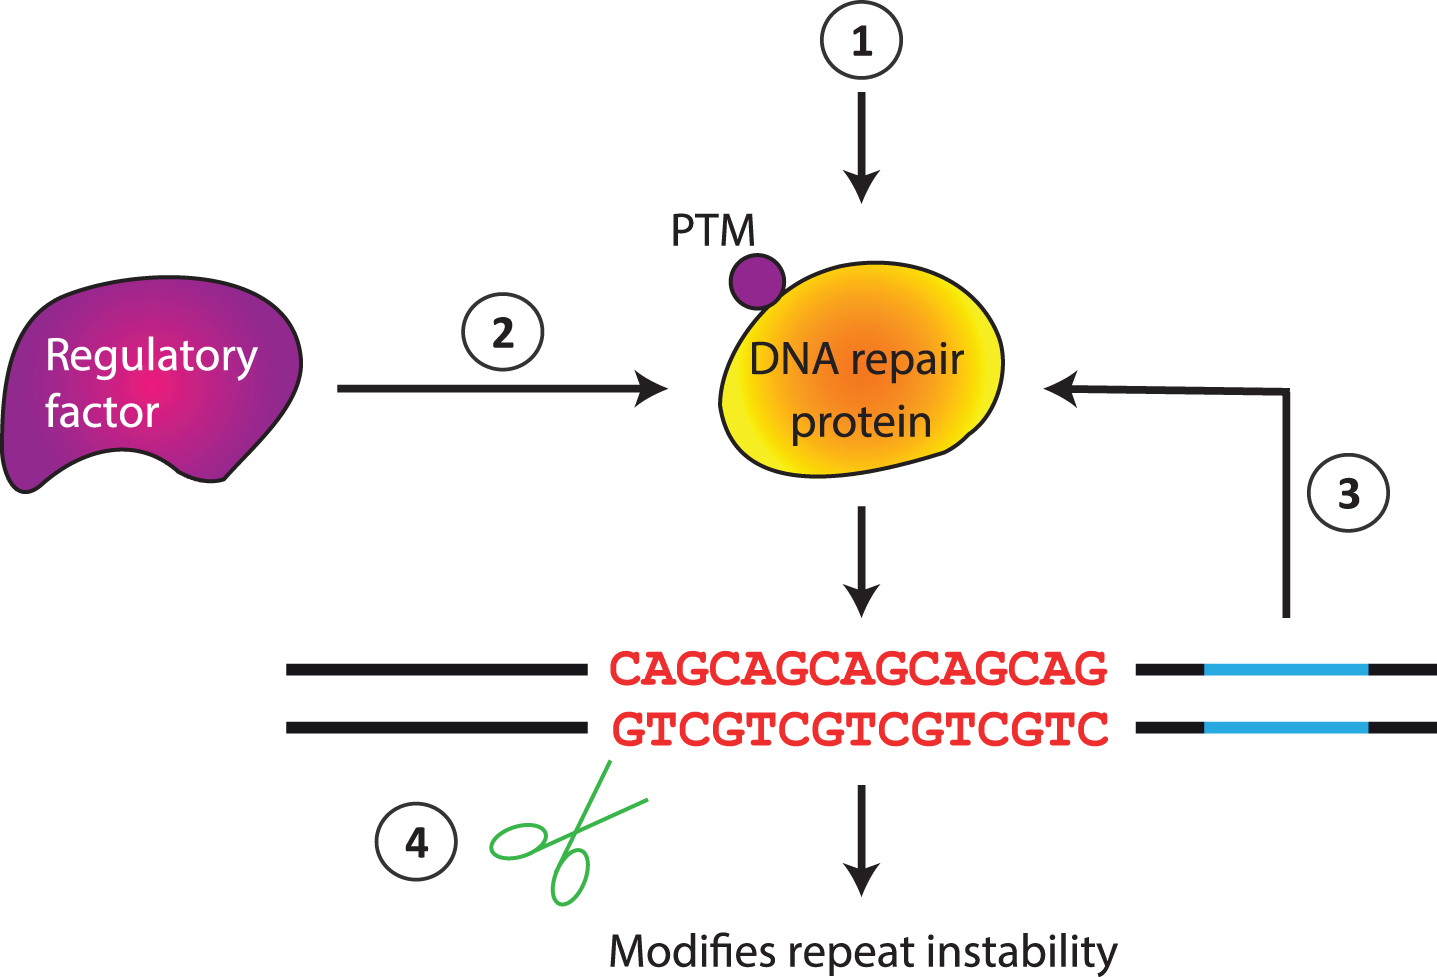 Potential mechanisms for instability modifiers. Genetic or pharmacological manipulation can directly alter the level of activity of a DNA repair protein (1). Indirect effects are also possible via a regulatory factor that controls DNA repair gene expression, stability or activity (2), e.g., altering a posttranslational modification (PTM), or via interaction with a cis-element (3). The repeat can also be modified by agents that directly interact with the repeat (4).